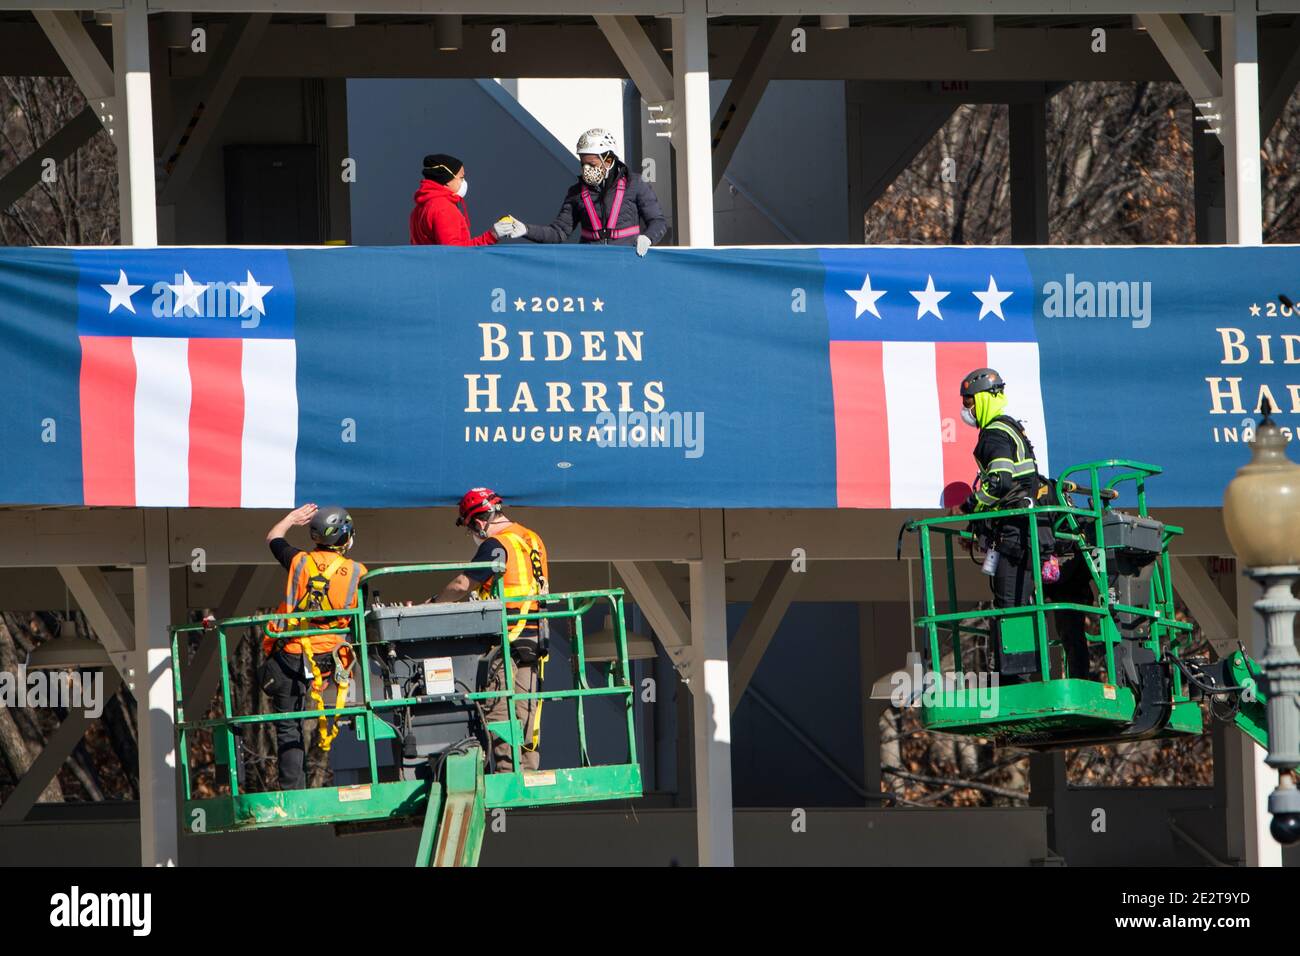 Workers hang bunting from a media riser for President-elect Joe Biden's inauguration parade outside the White House in Washington, DC, USA, 14 January 2021.Credit: Jim LoScalzo/Pool via CNP /MediaPunch Stock Photo